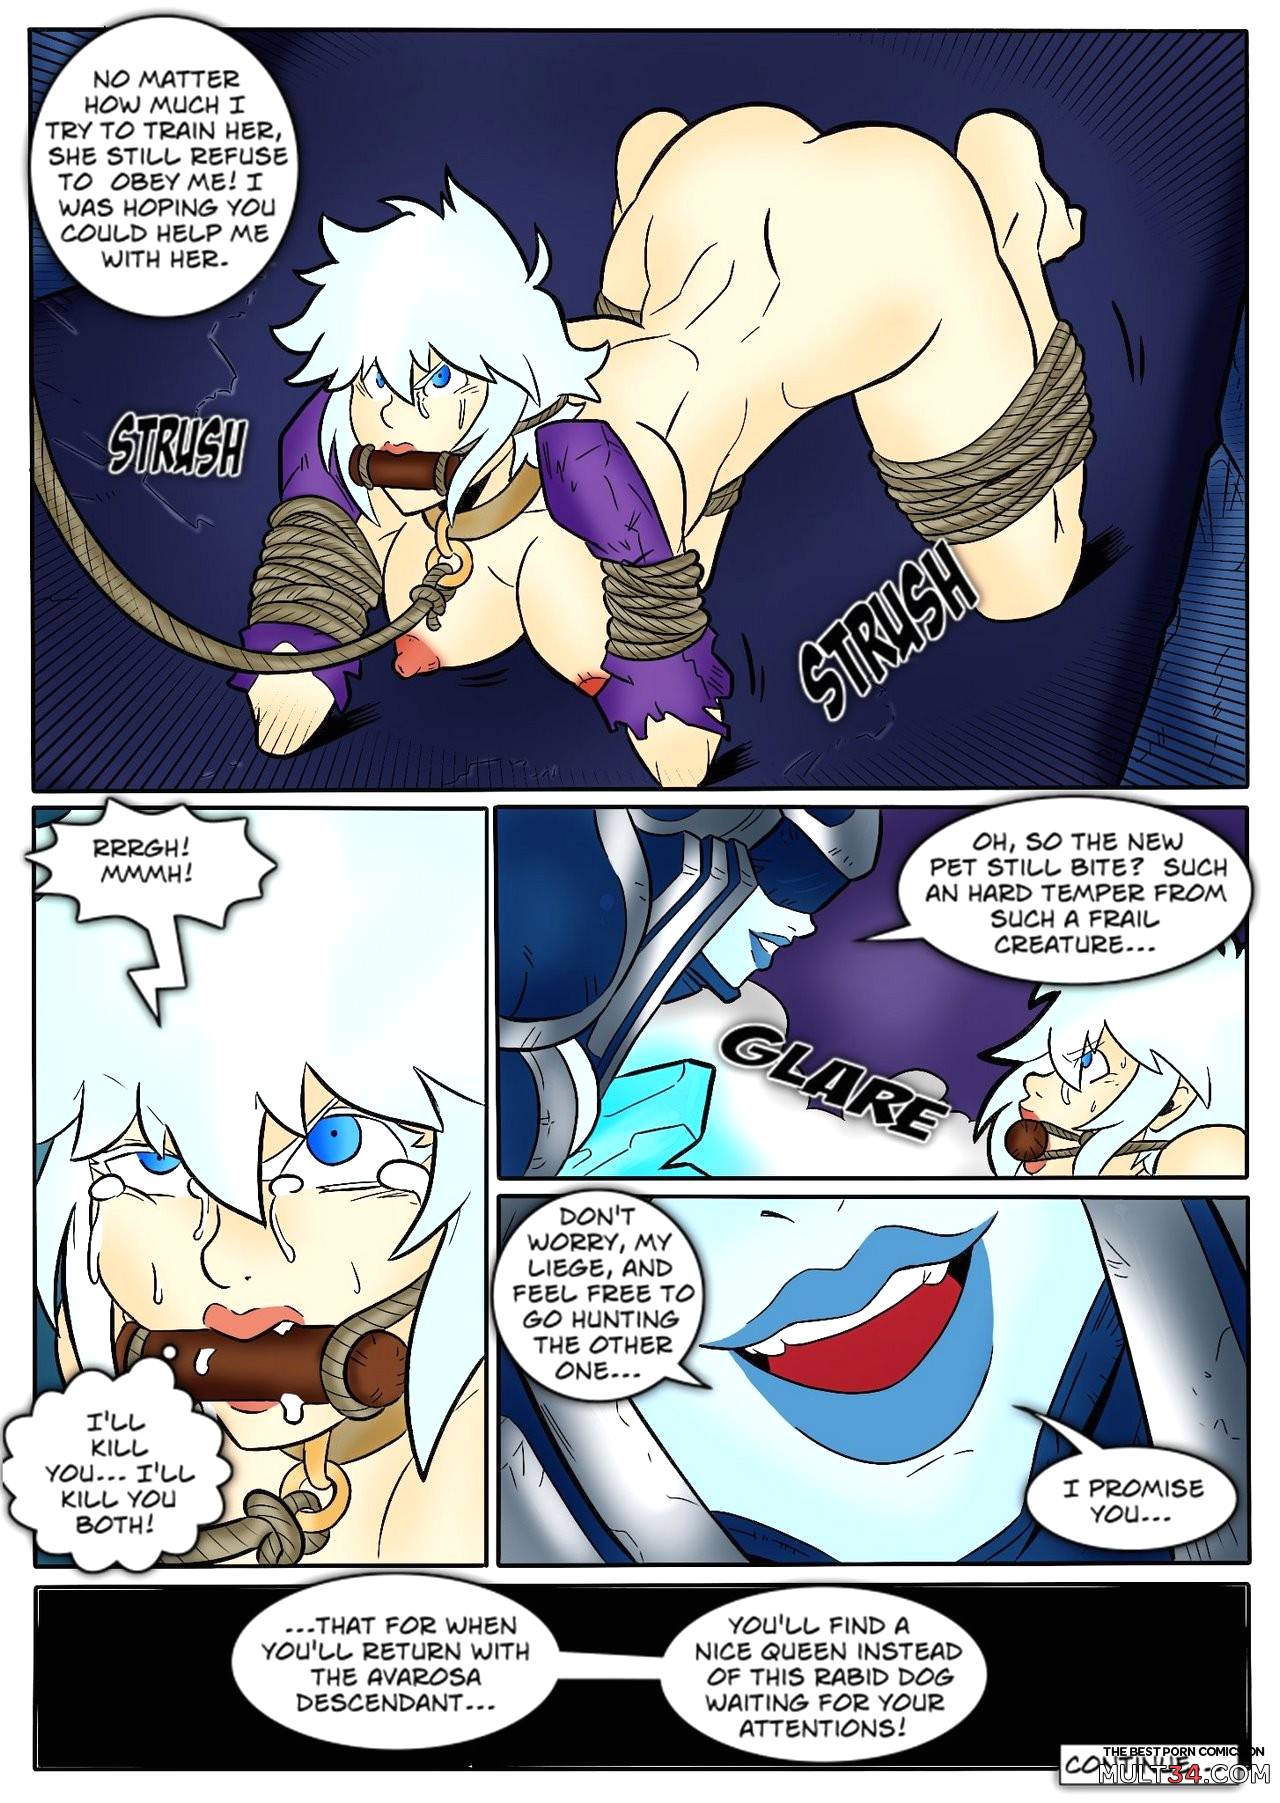 Tales of the Troll King ch. 1 - 3 ] [Colorized] page 34